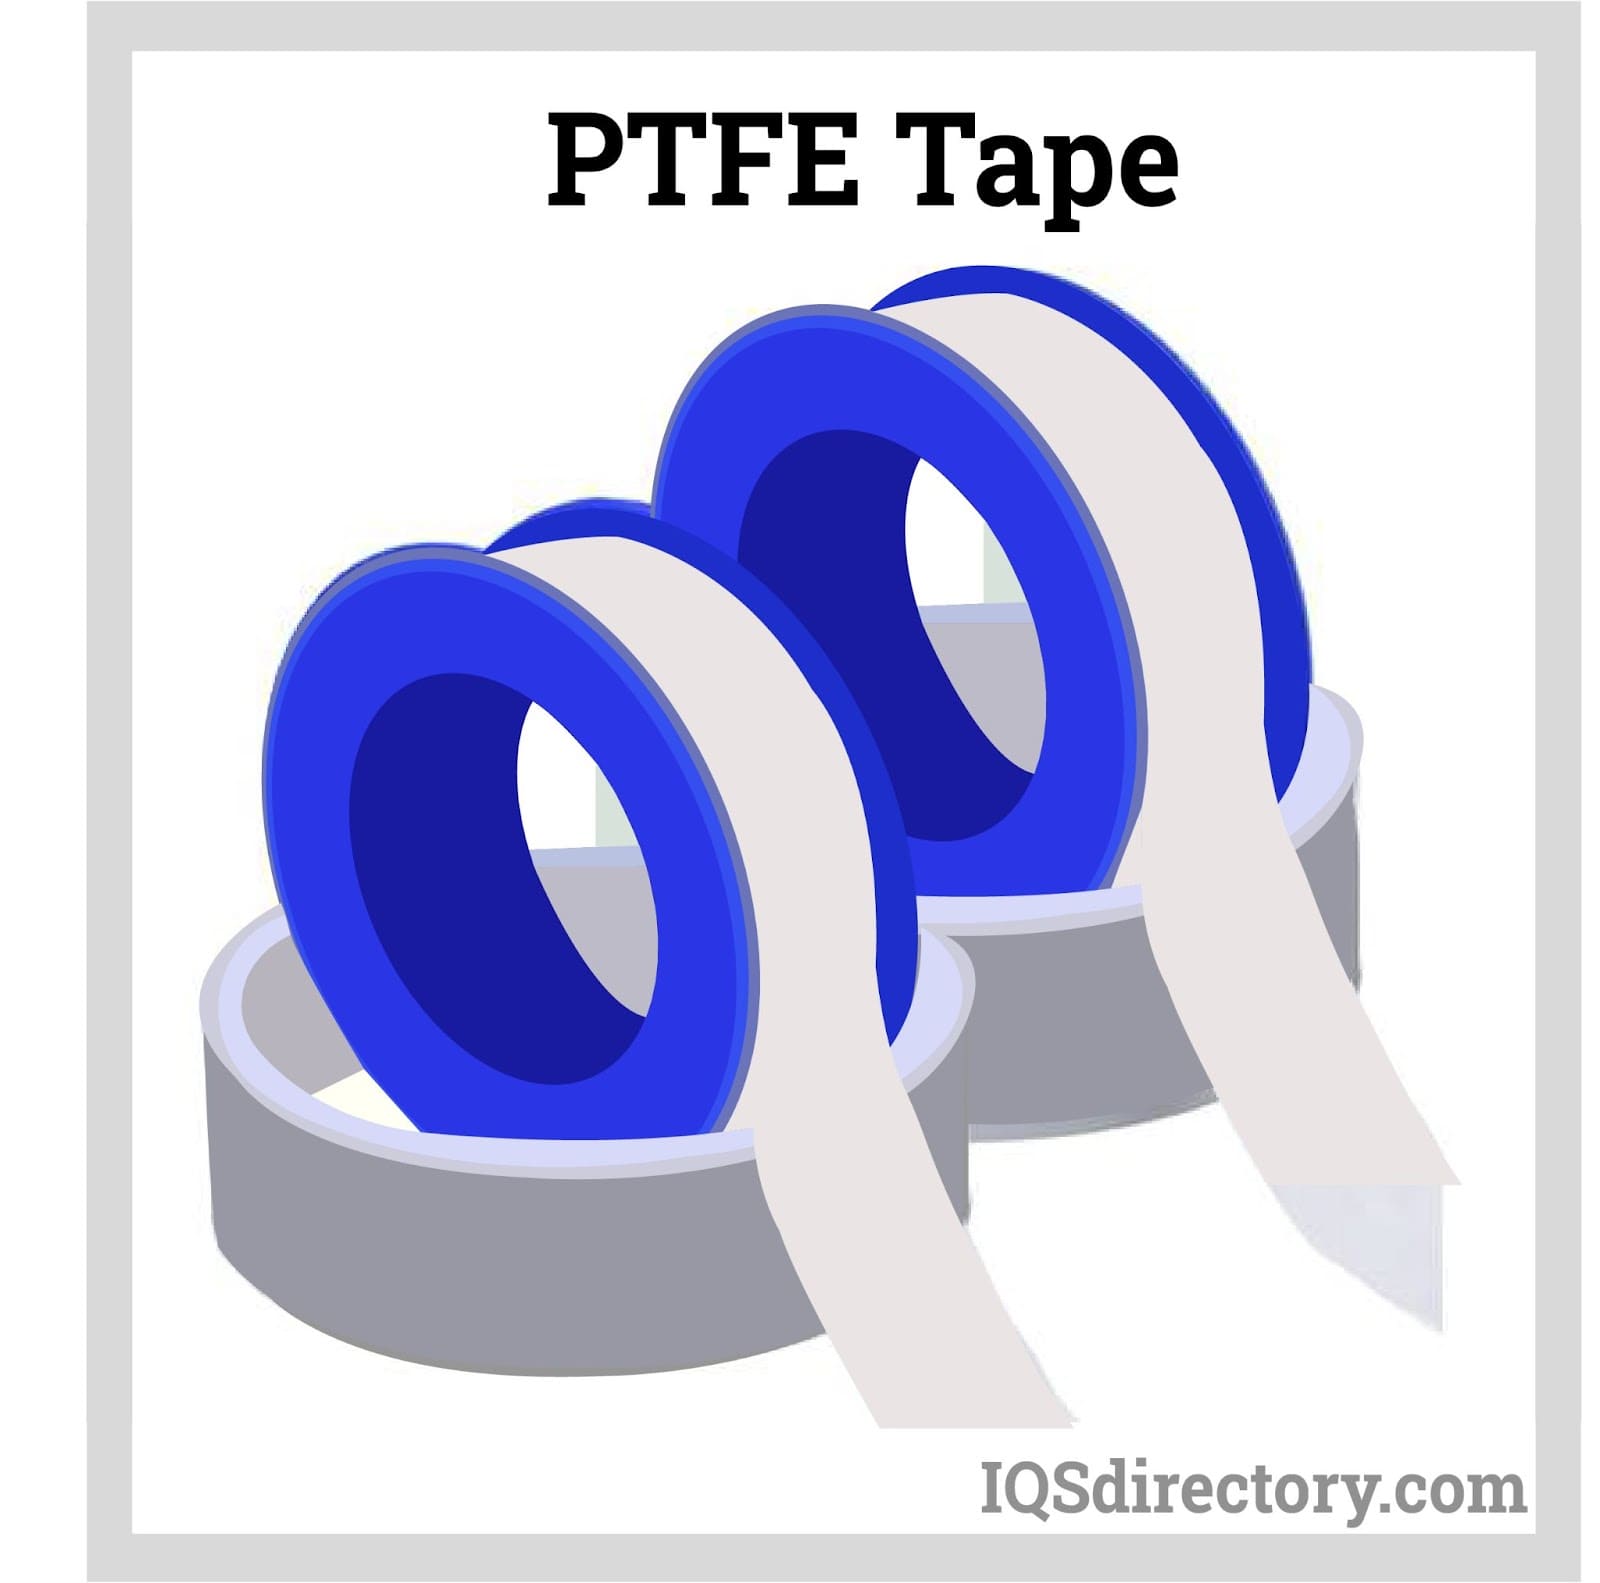 Tape Manufacturers